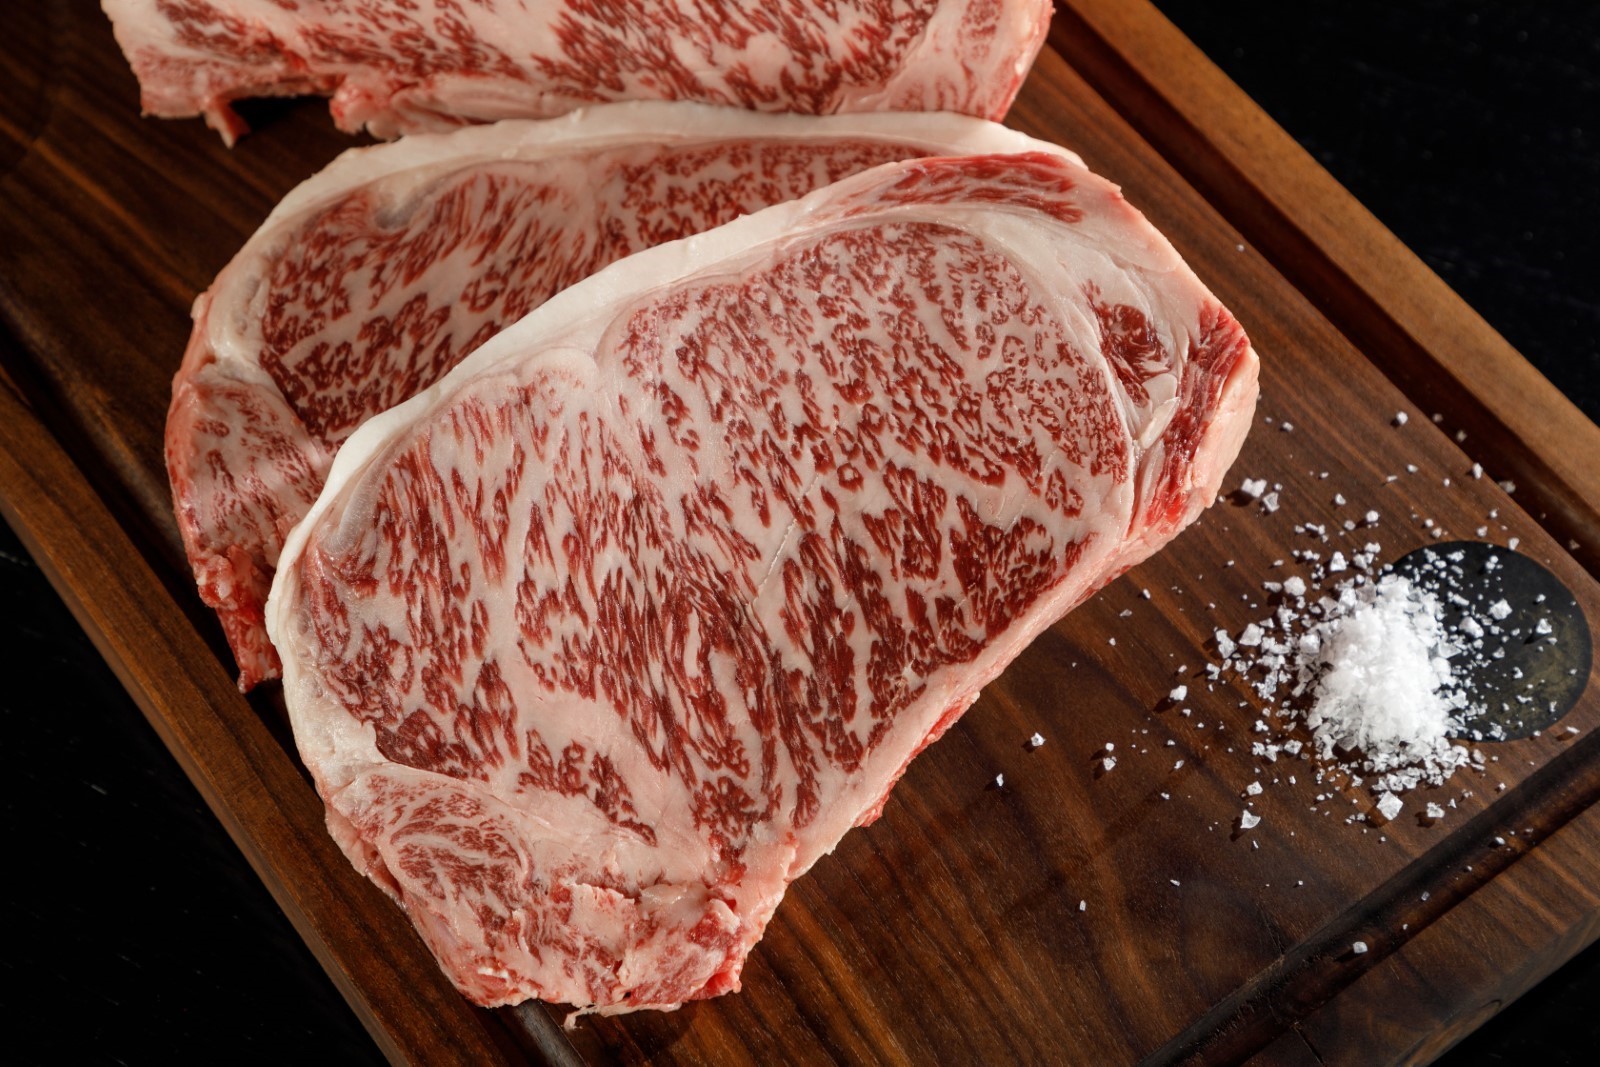 Where to get the best steaks? The experts speak